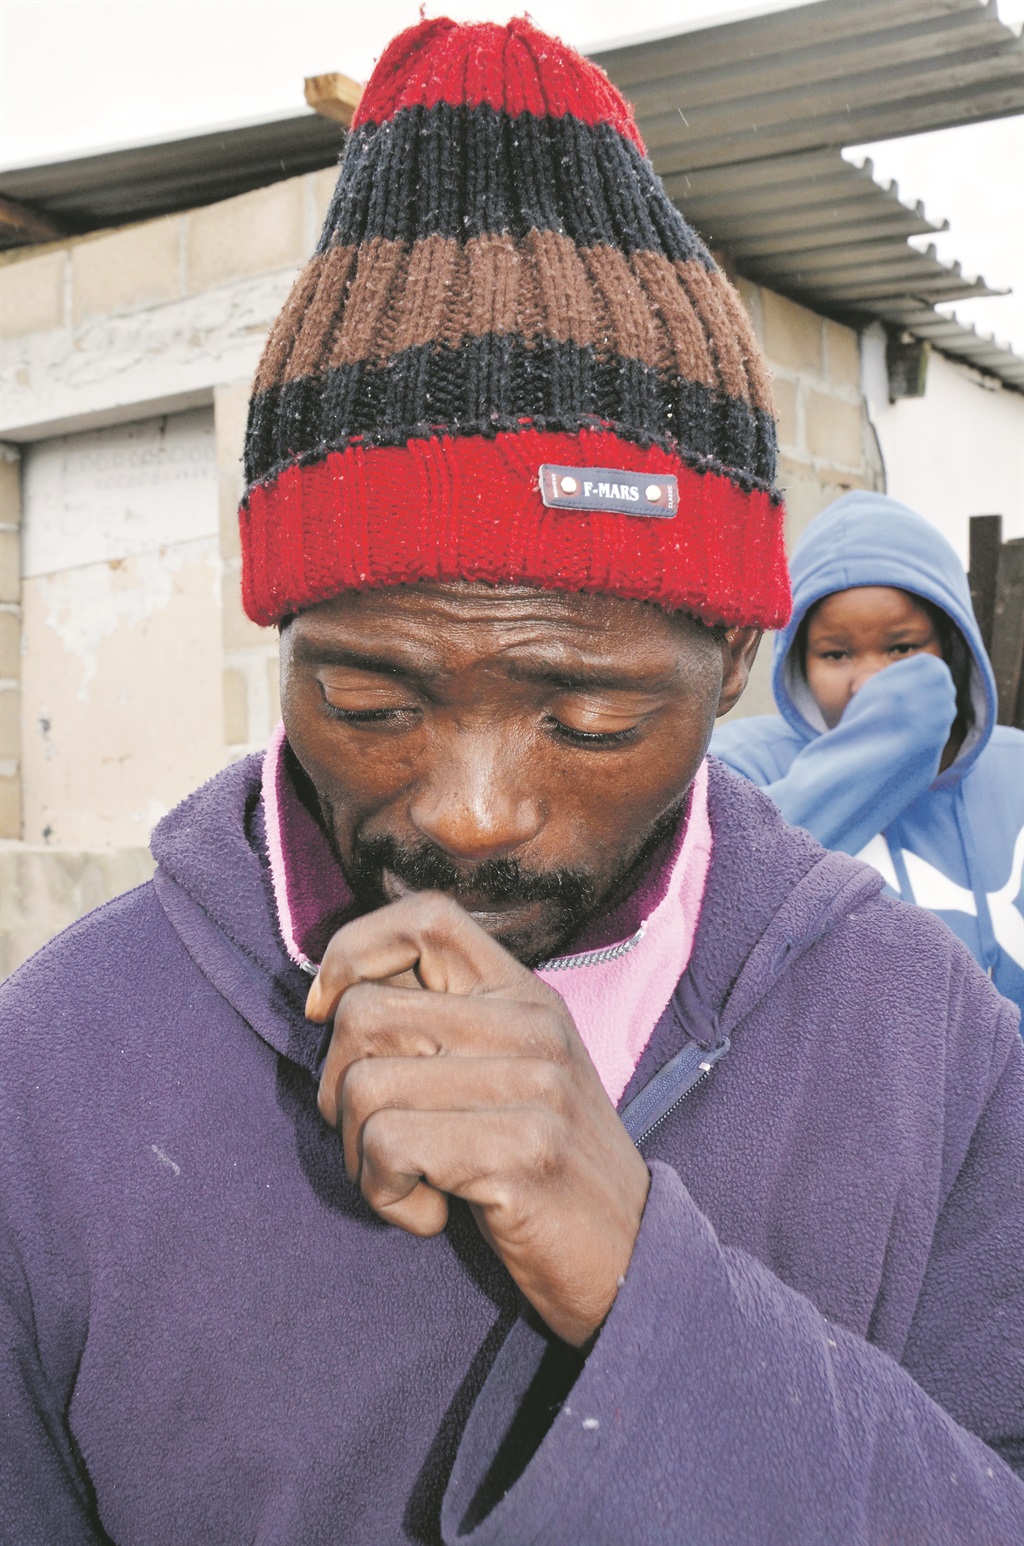 Father Zibele Mjila returned home from a piece job on Monday to find his house in flames.